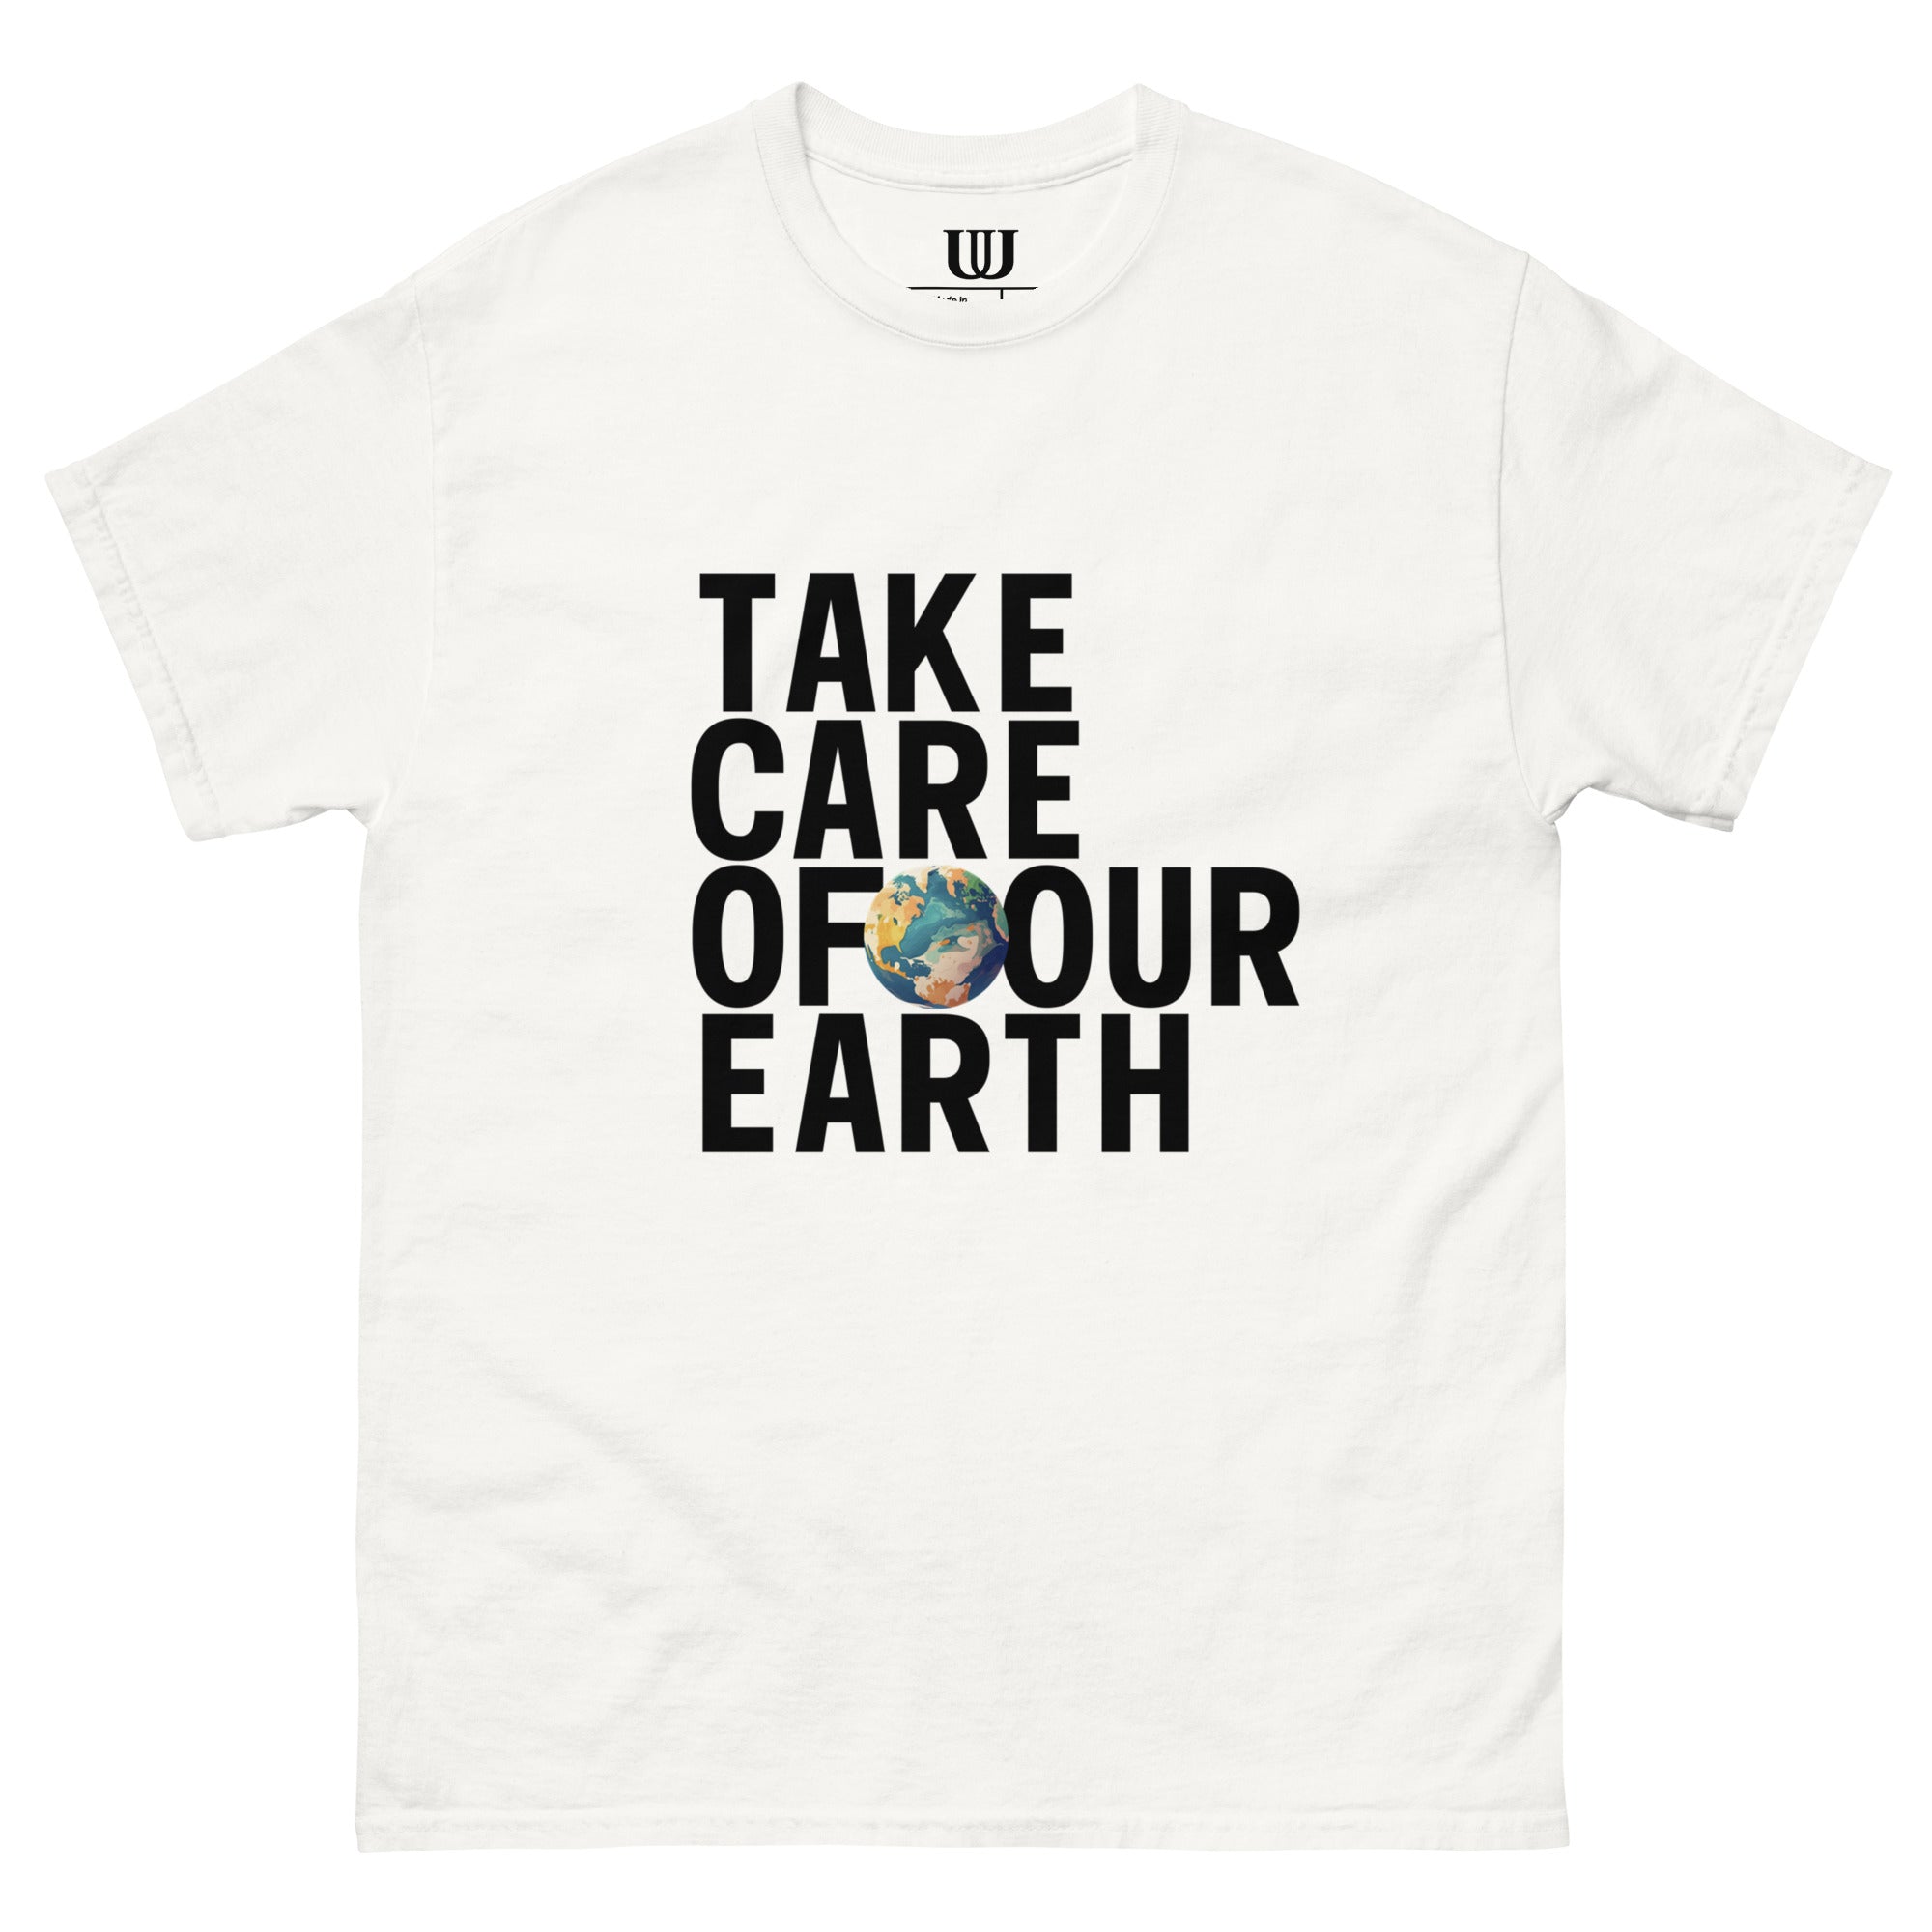 TAKE CARE OF OUR EARTH classic tee